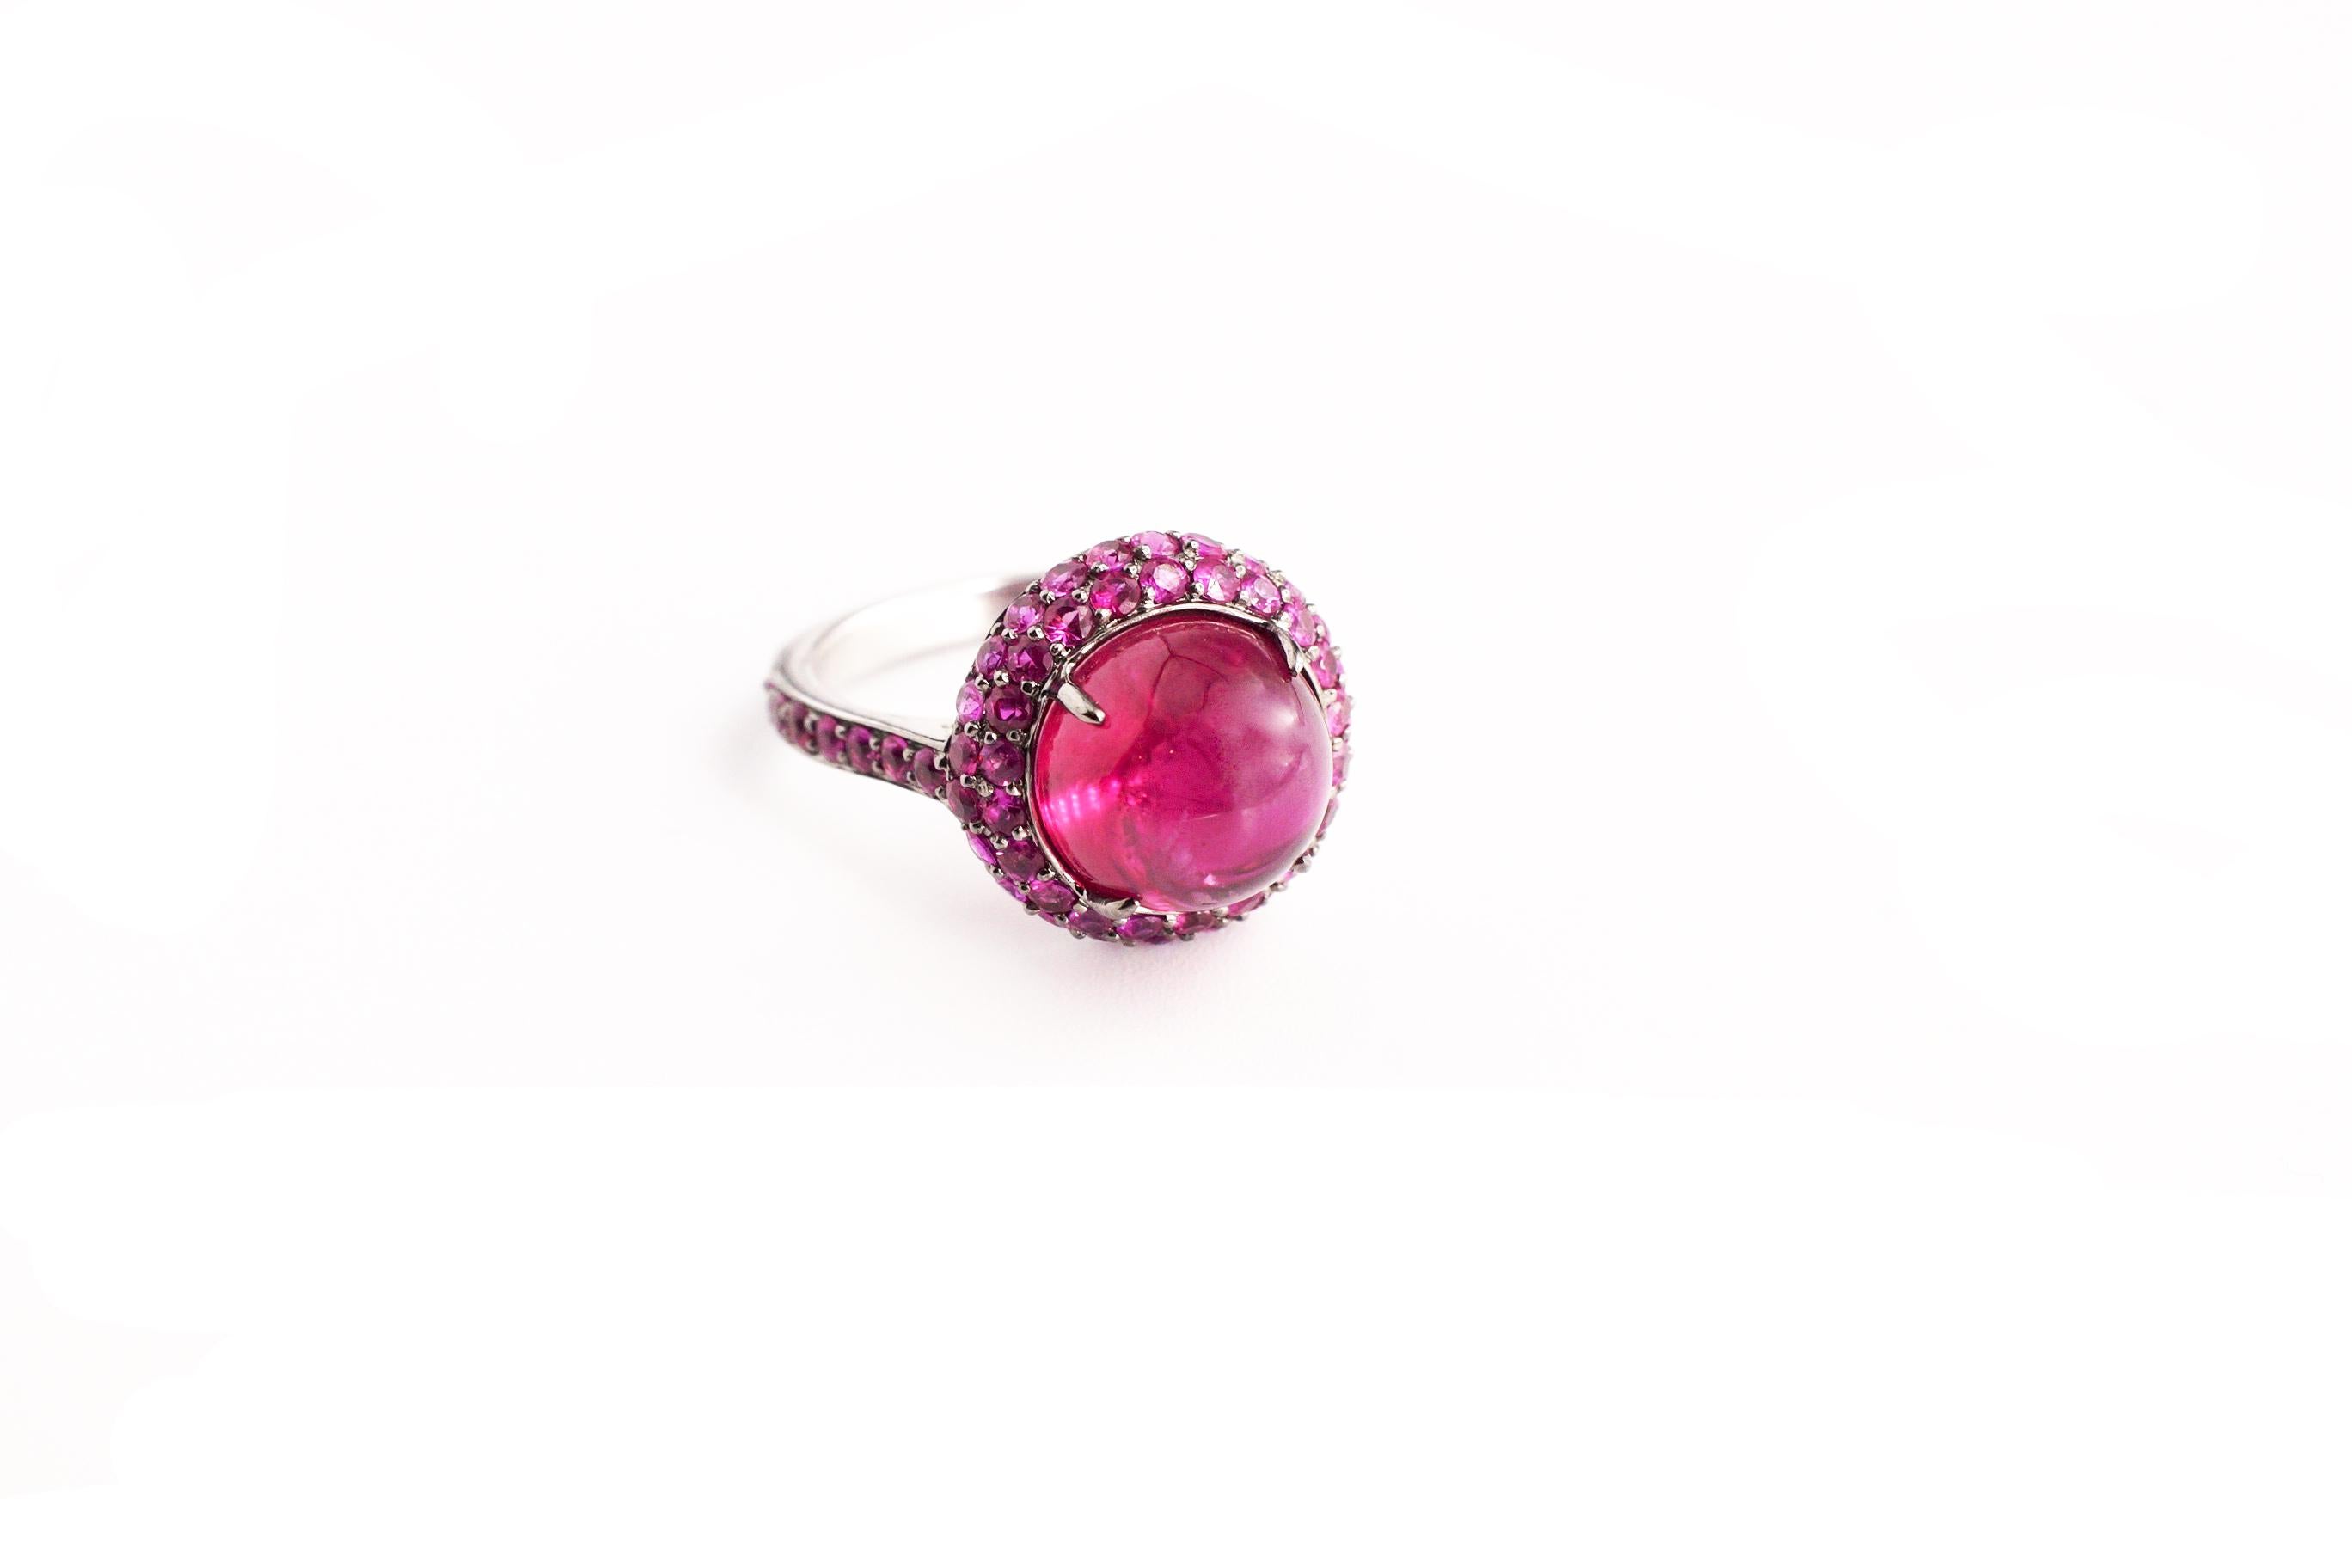 Jilly Ring – Rubellite
An eighteen-karat blackened white gold ring on a pink sapphire-encrusted shank, showcasing a high-domed rubellite cabochon that has been completely surrounded with pink sapphires.  
Size 6
Rubellite Total Weight – 5.20